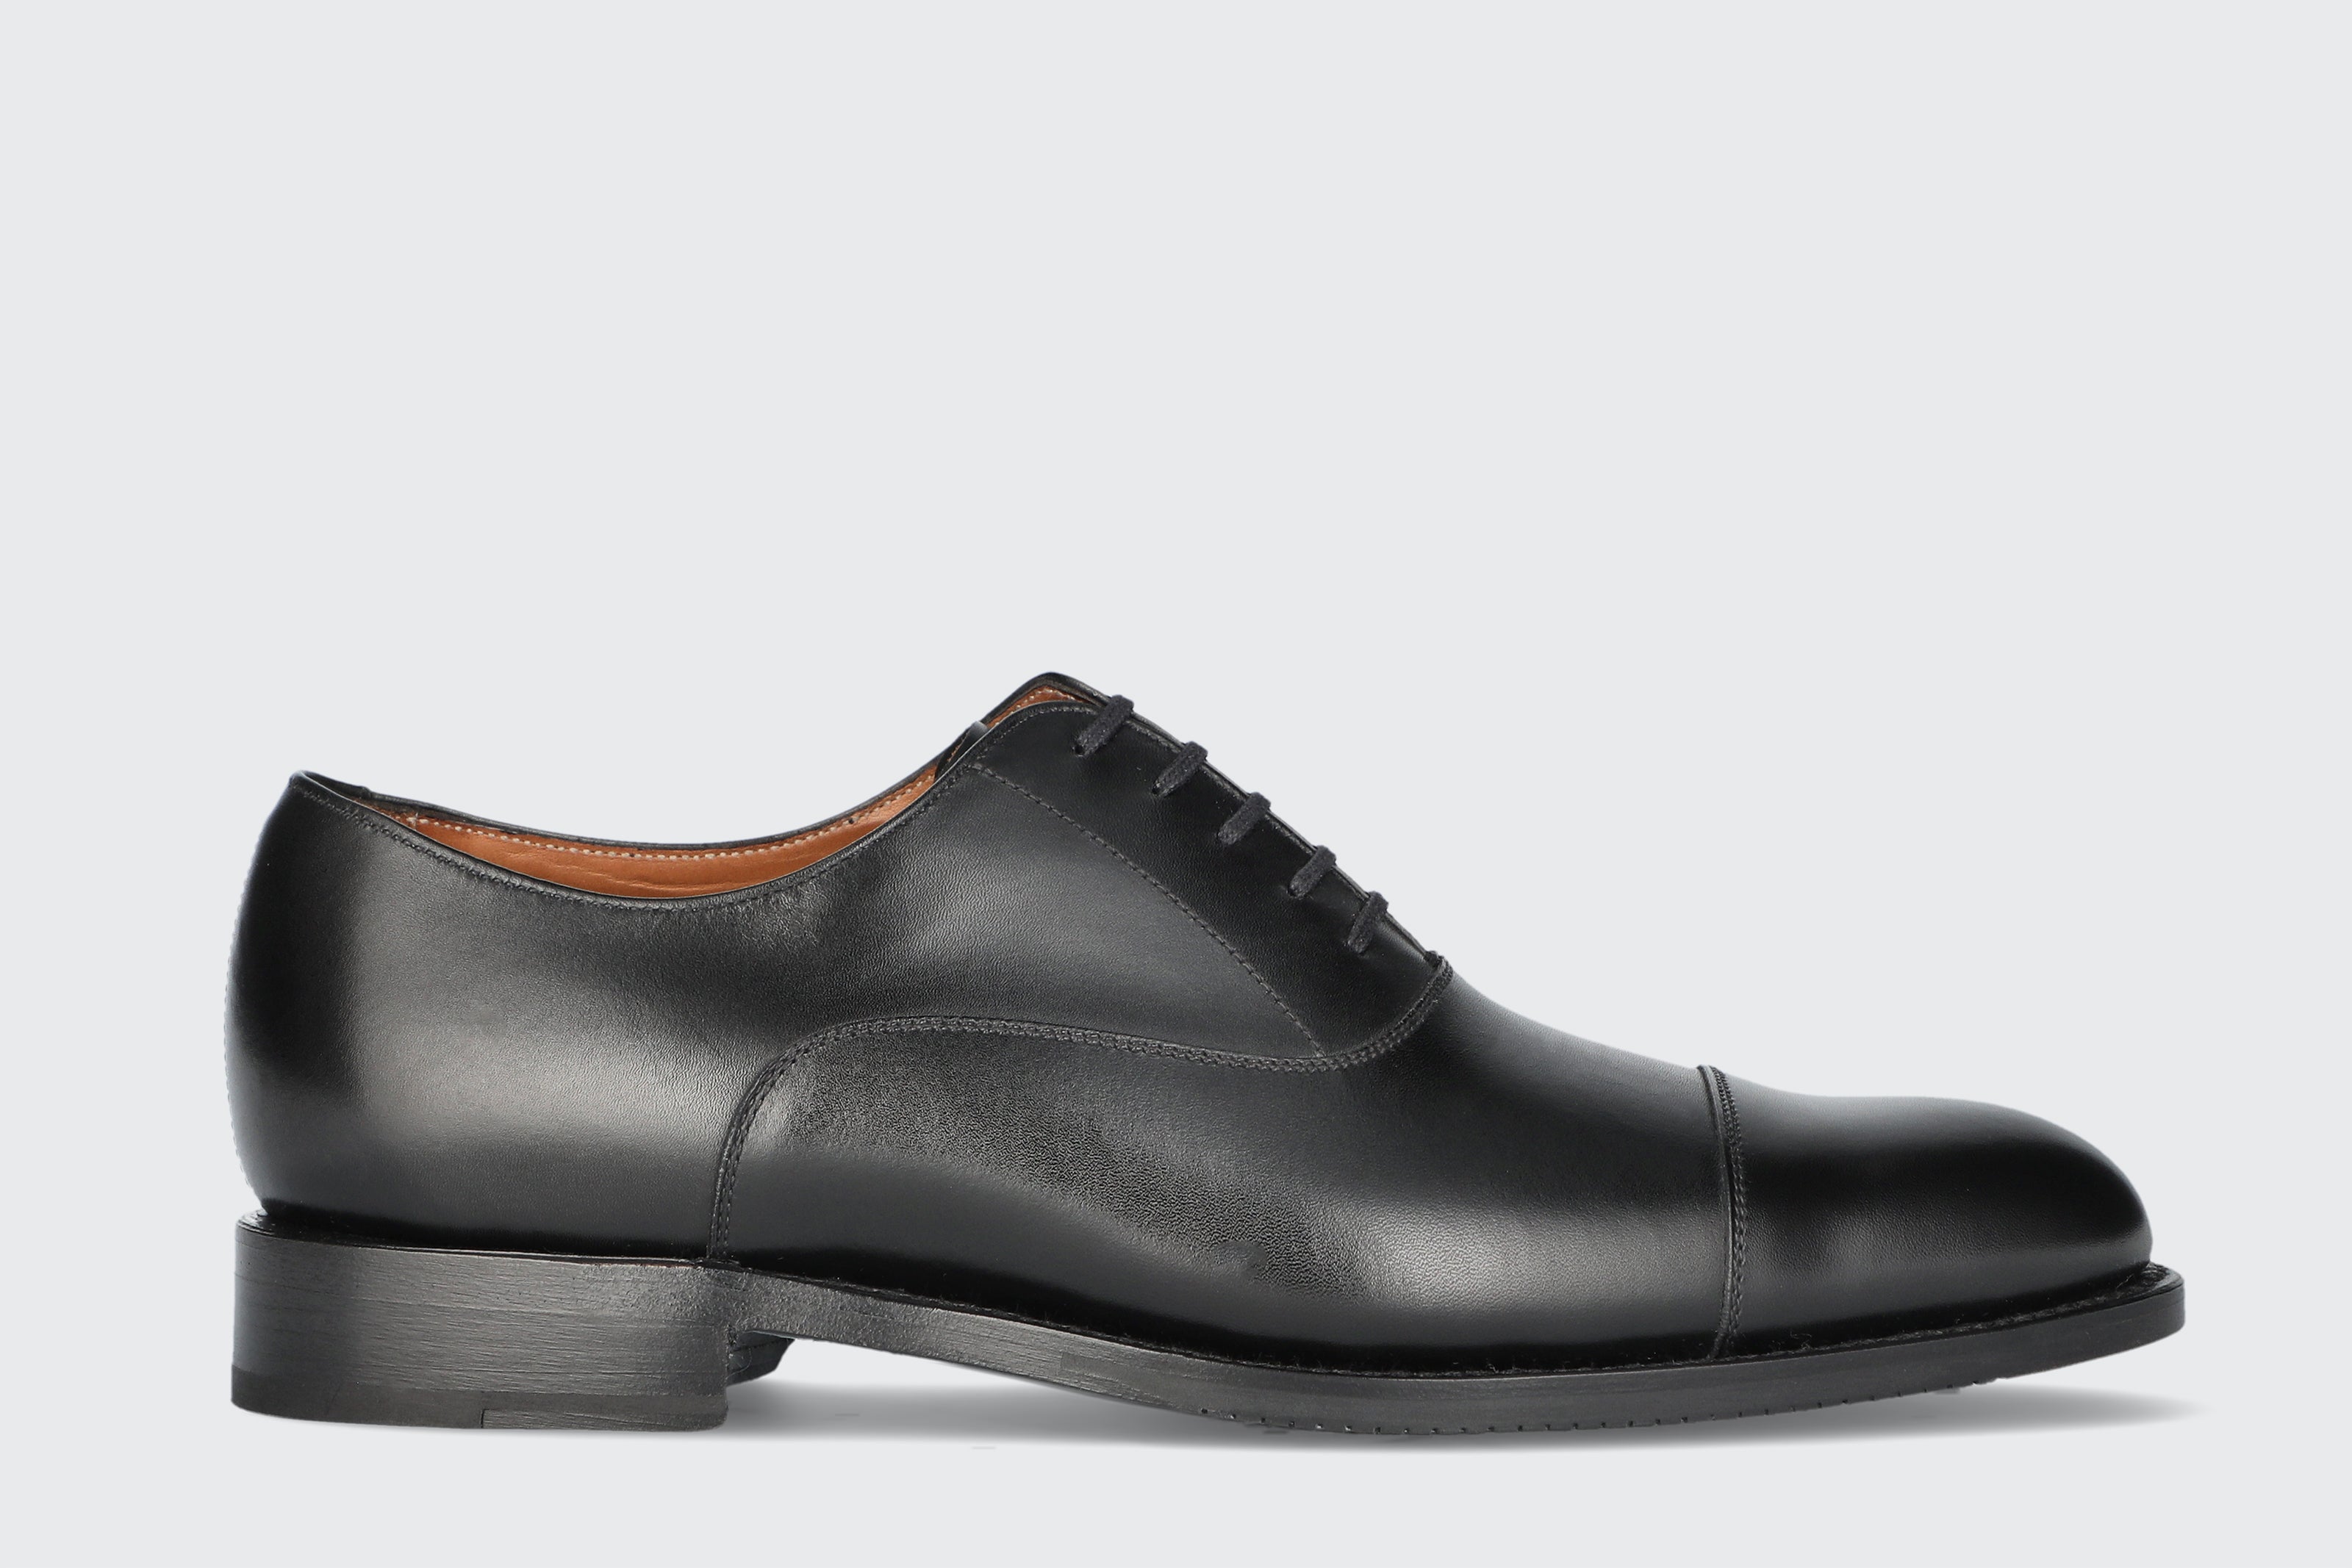 Men's Patent Leather Shoes  When Can You Wear Patent Leather